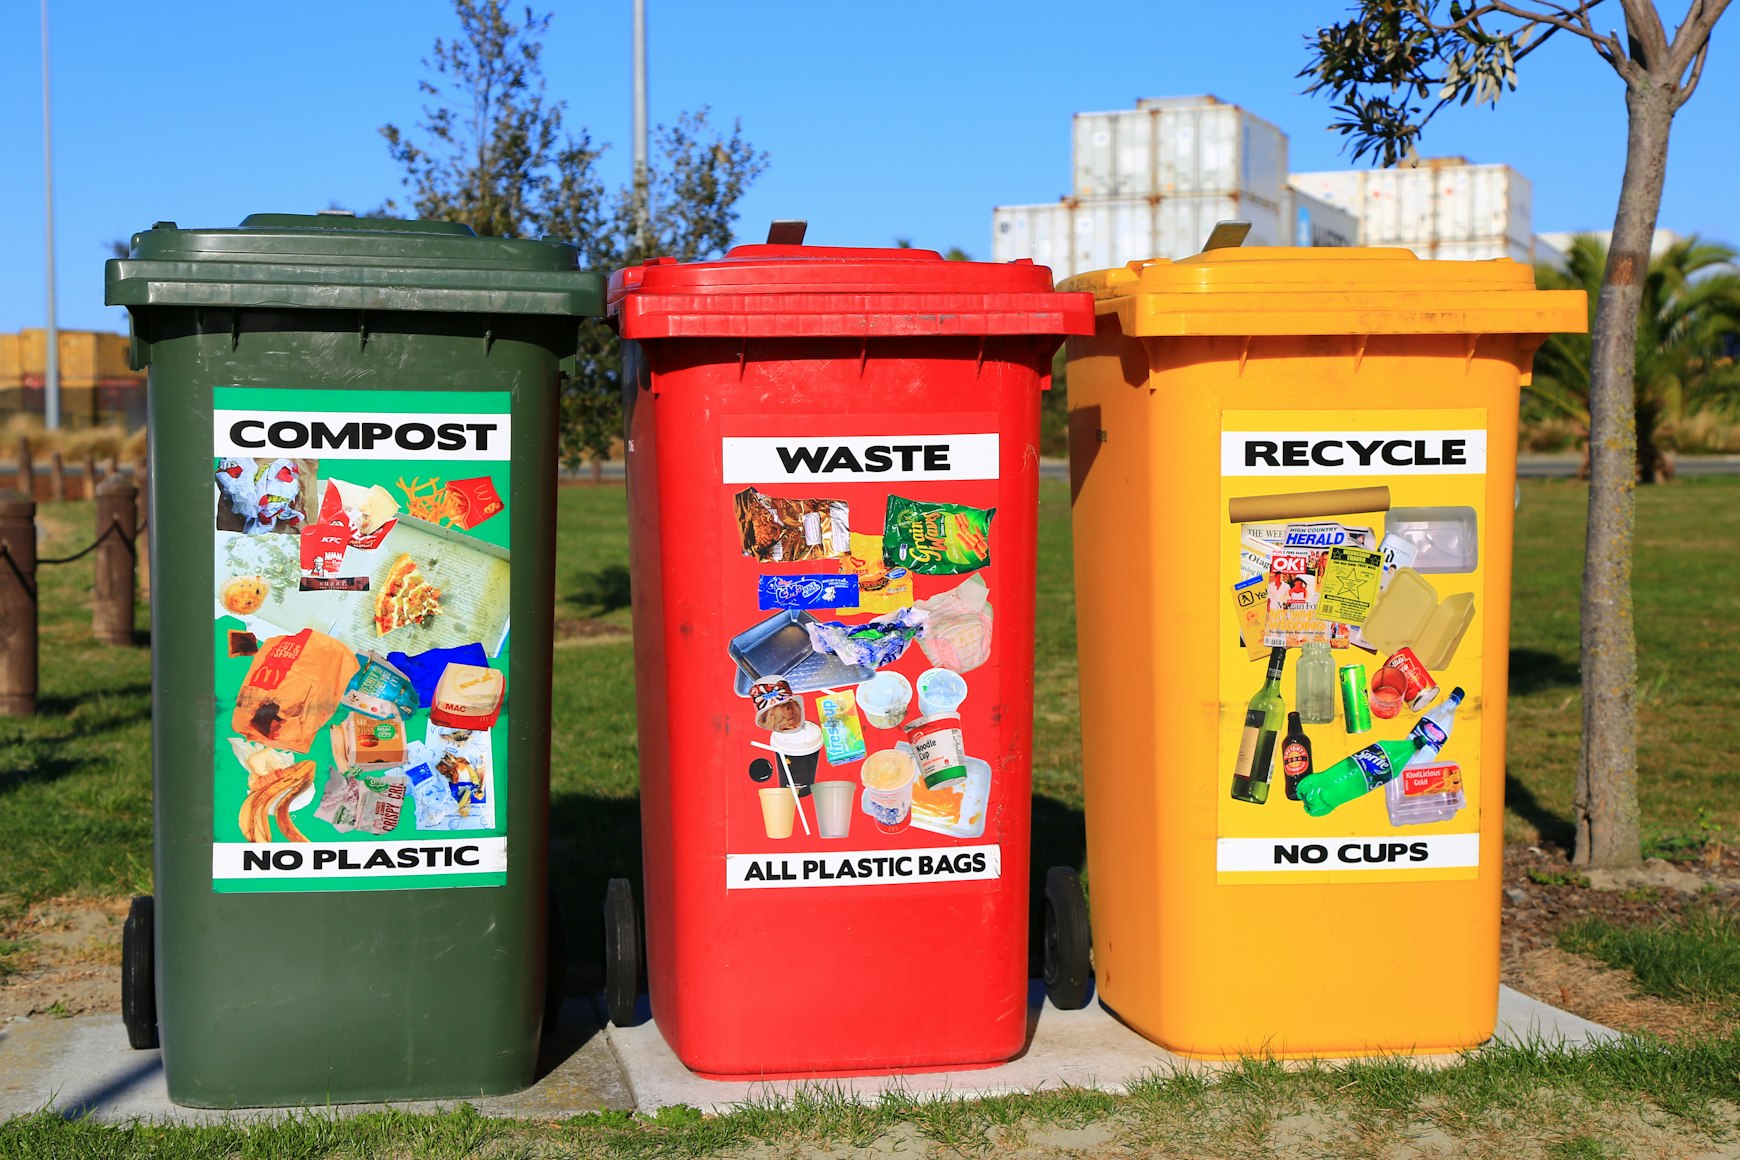 Three bins for: Compost, Waste and Recycle